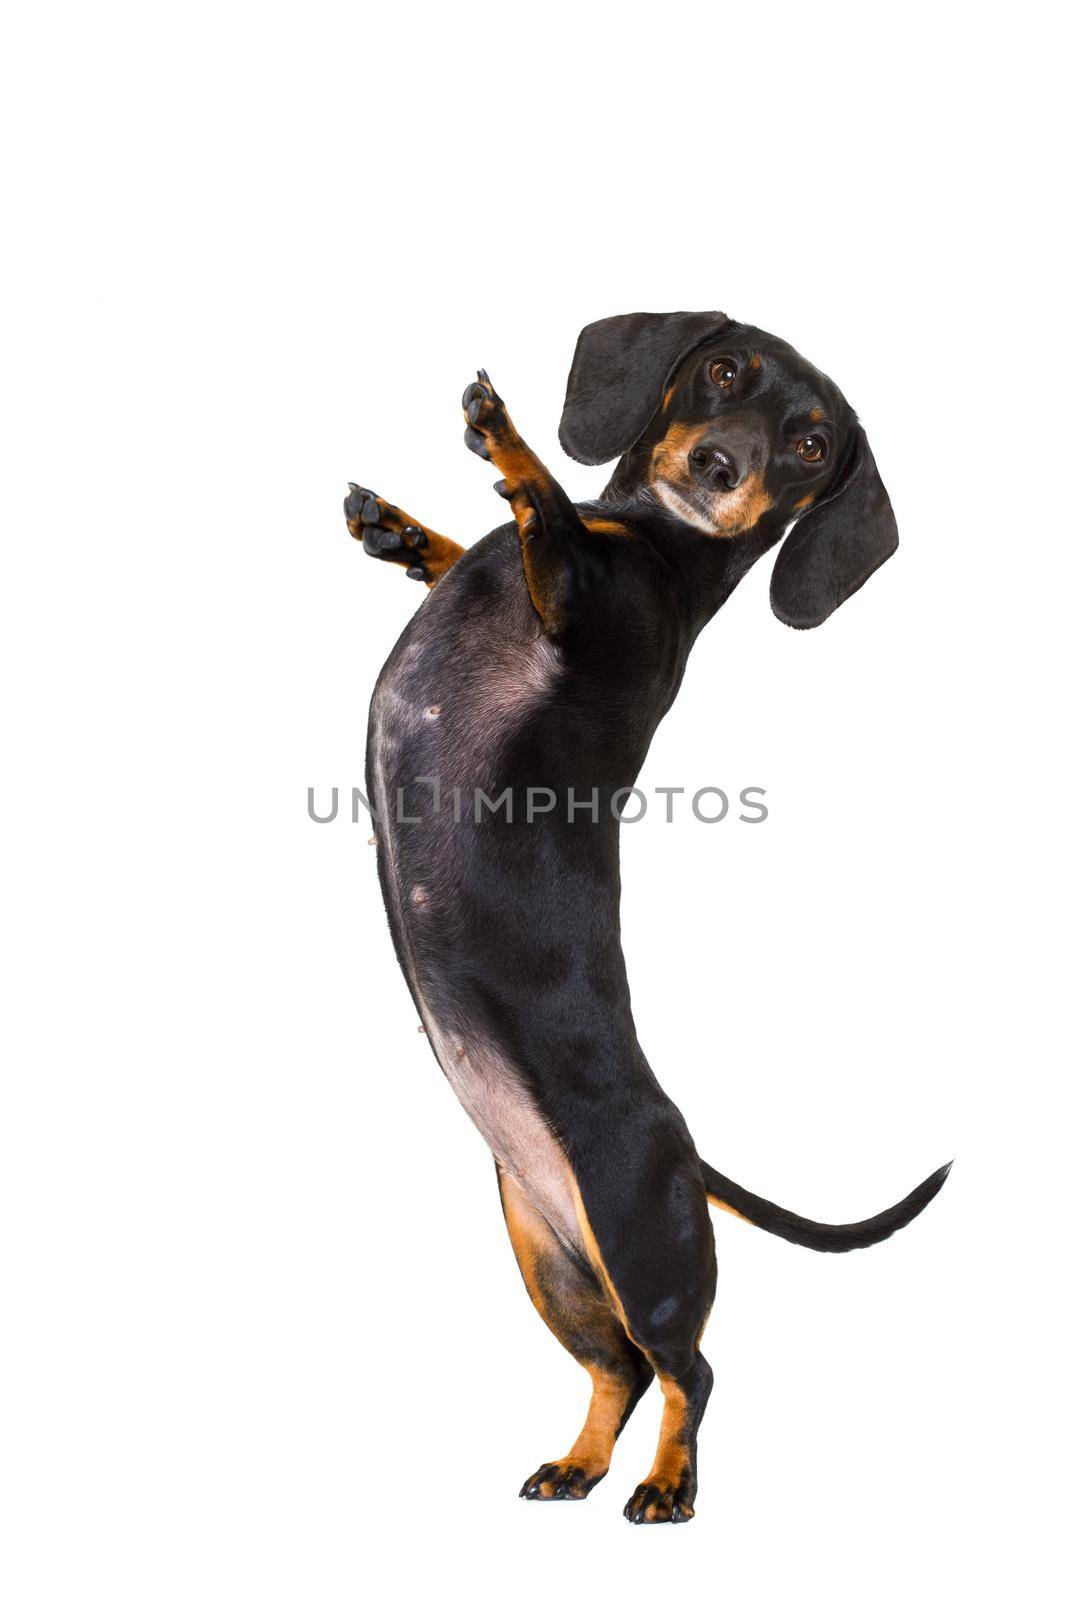 dachshund sausage dog  isolated on white background with high five gesture up right and standing ,looking at you